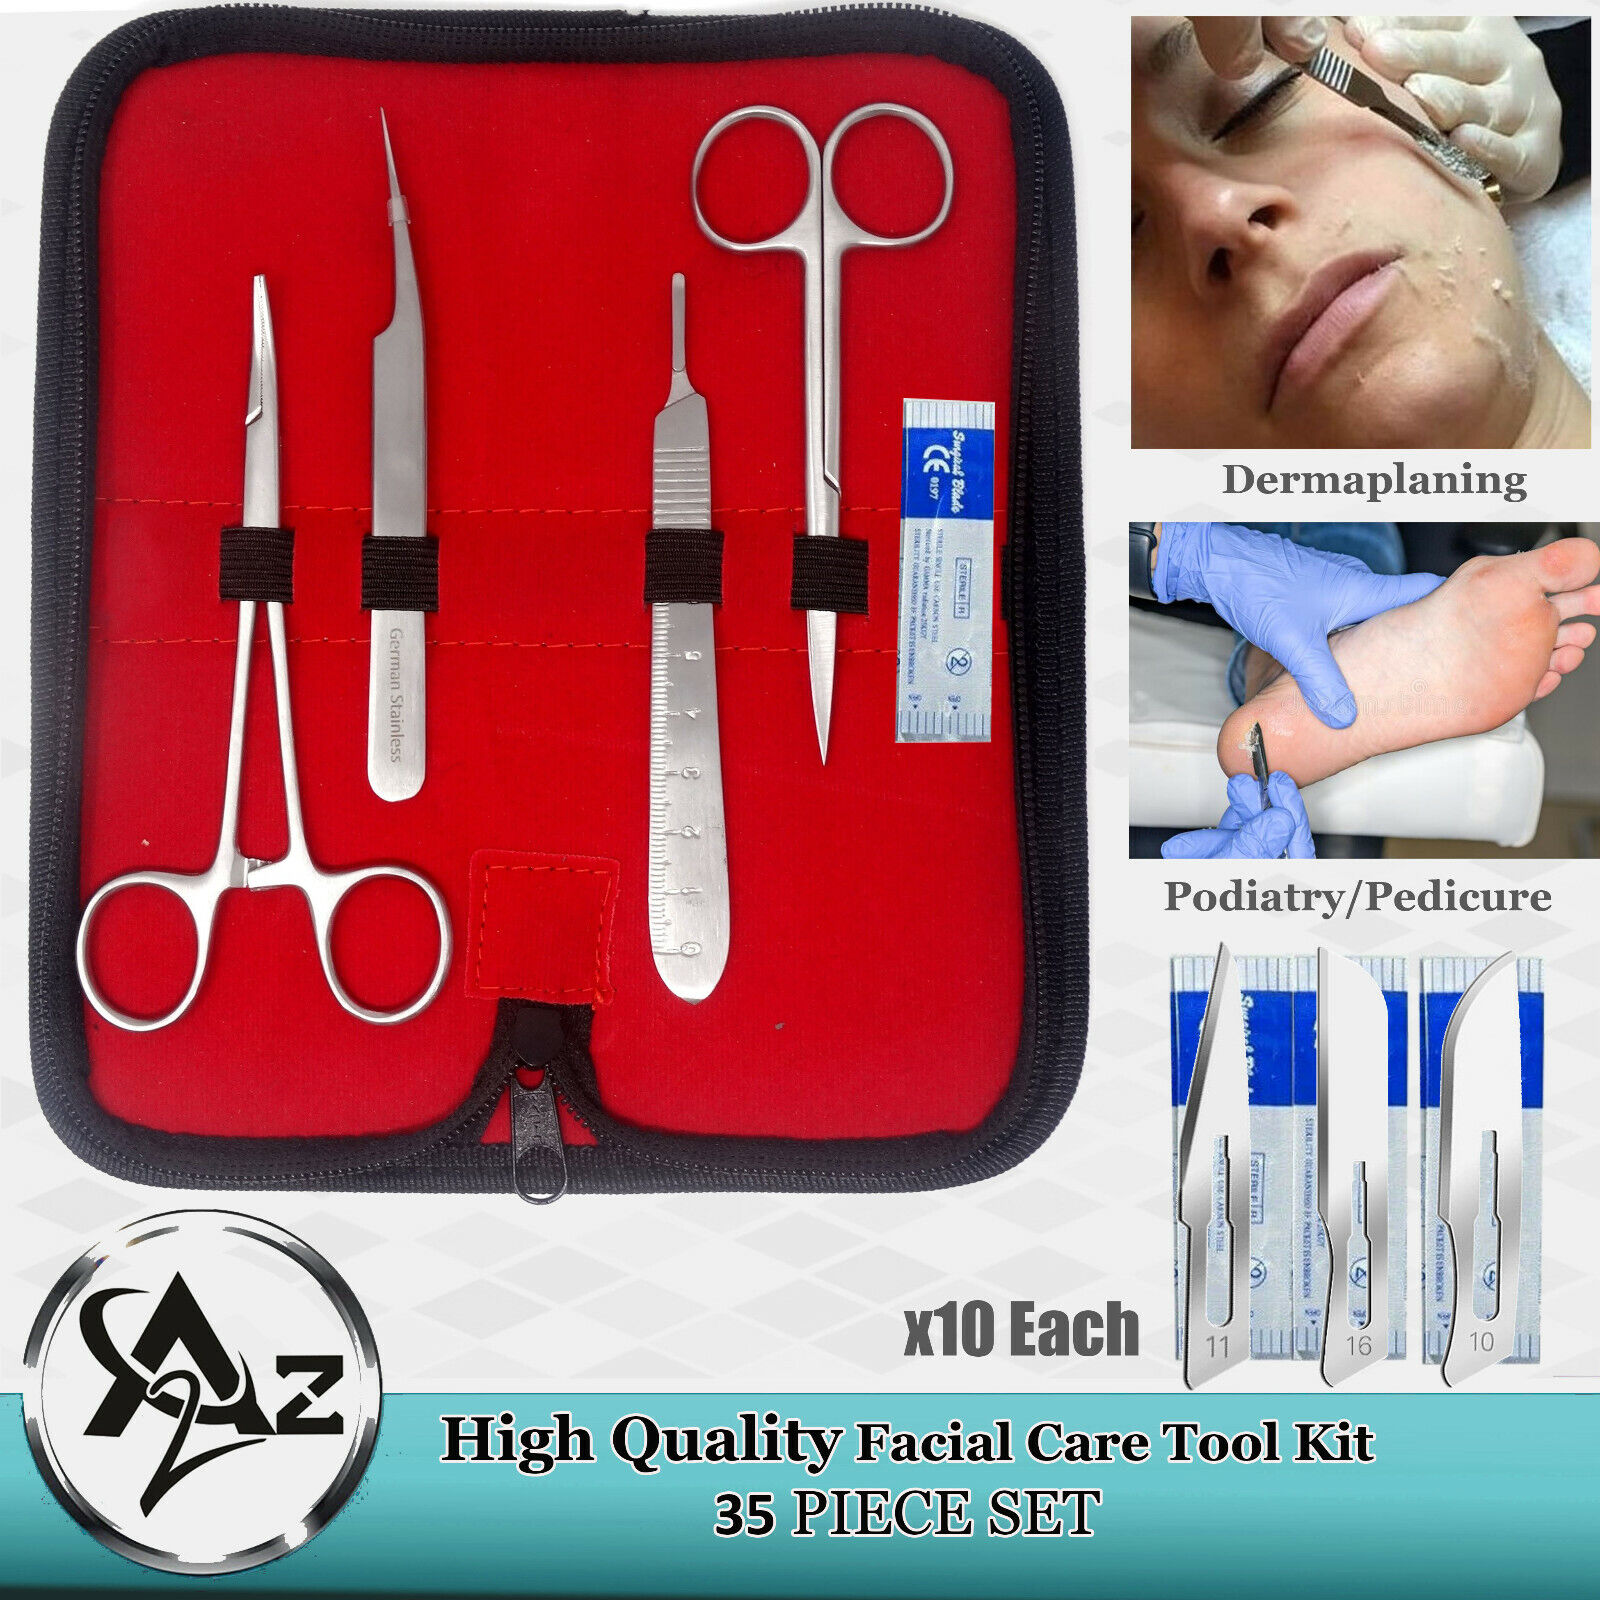 Best Dermaplaning Dead Skin Removing Face Care Kit - Disposable Blade #16,10,11  A2Z SCILAB Does Not Apply